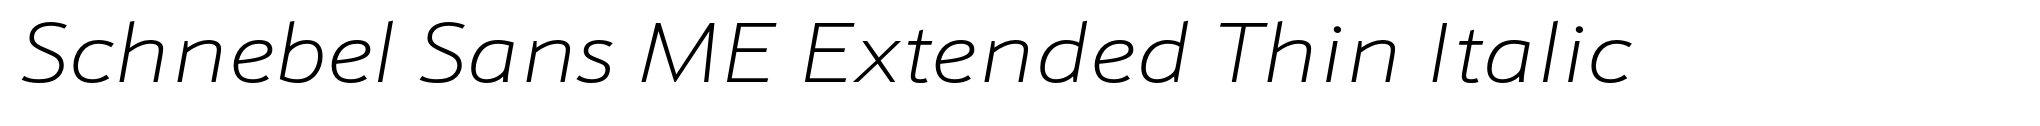 Schnebel Sans ME Extended Thin Italic image